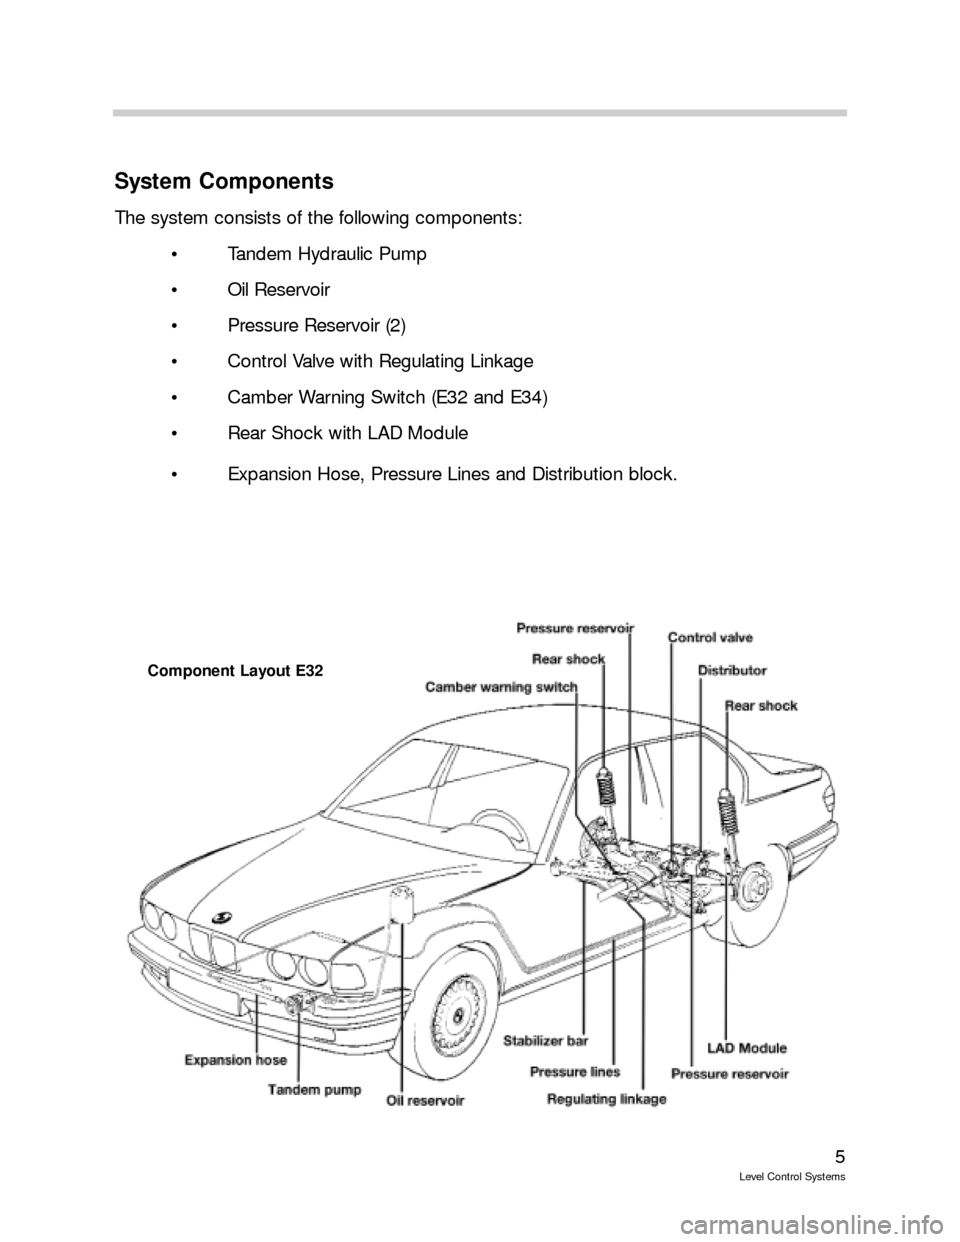 BMW 750IL 1999 E38 Level Control System Manual 5
Level Control Systems
System Components
The system consists of the following components:
 Tandem Hydraulic Pump
 Oil Reservoir
 Pressure Reservoir (2)
 Control Valve with Regulating Linkage
 Ca